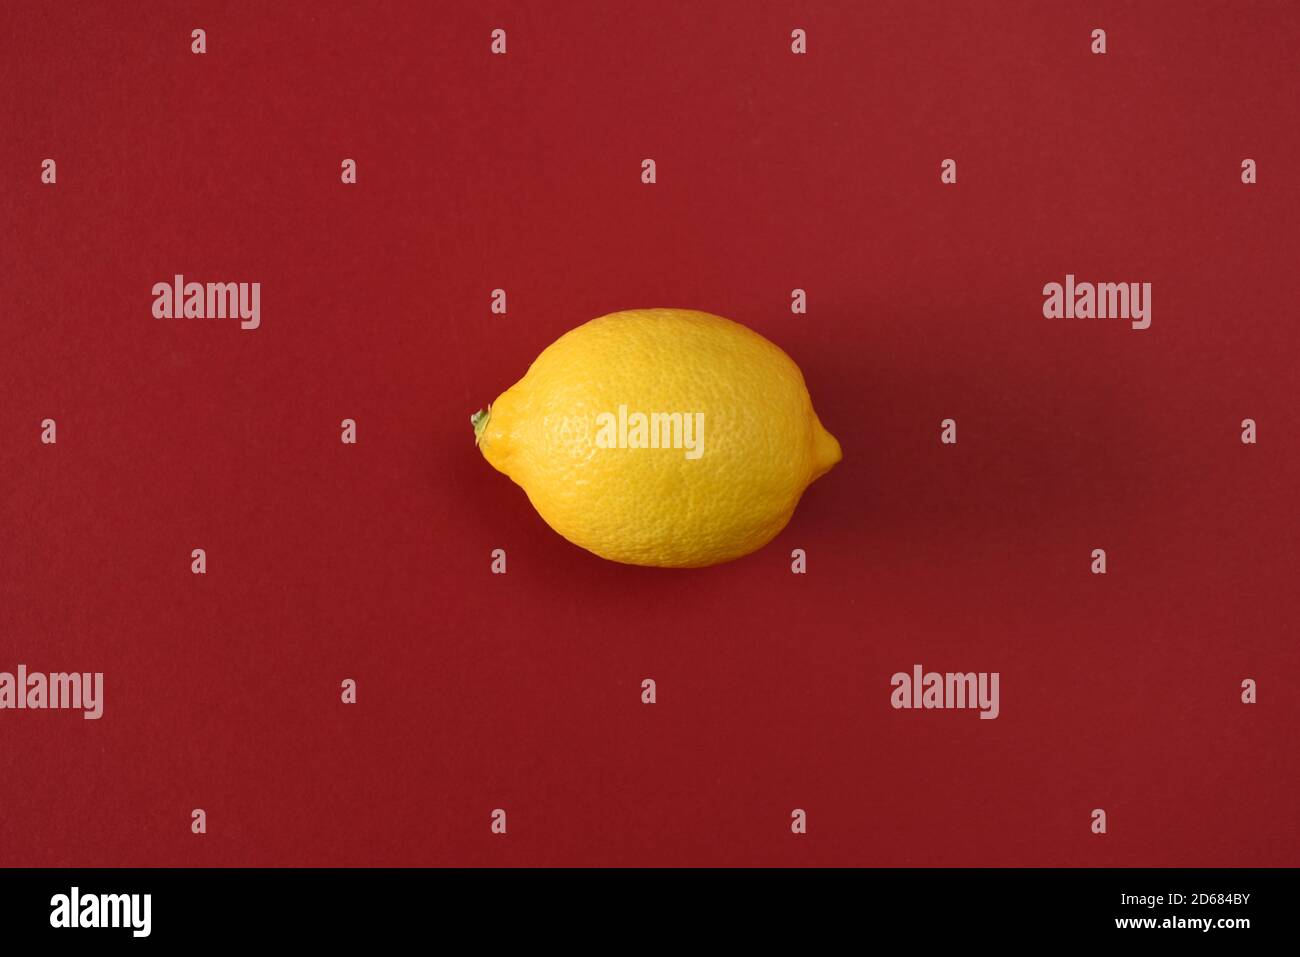 Whole lemon isolated on a red background Stock Photo